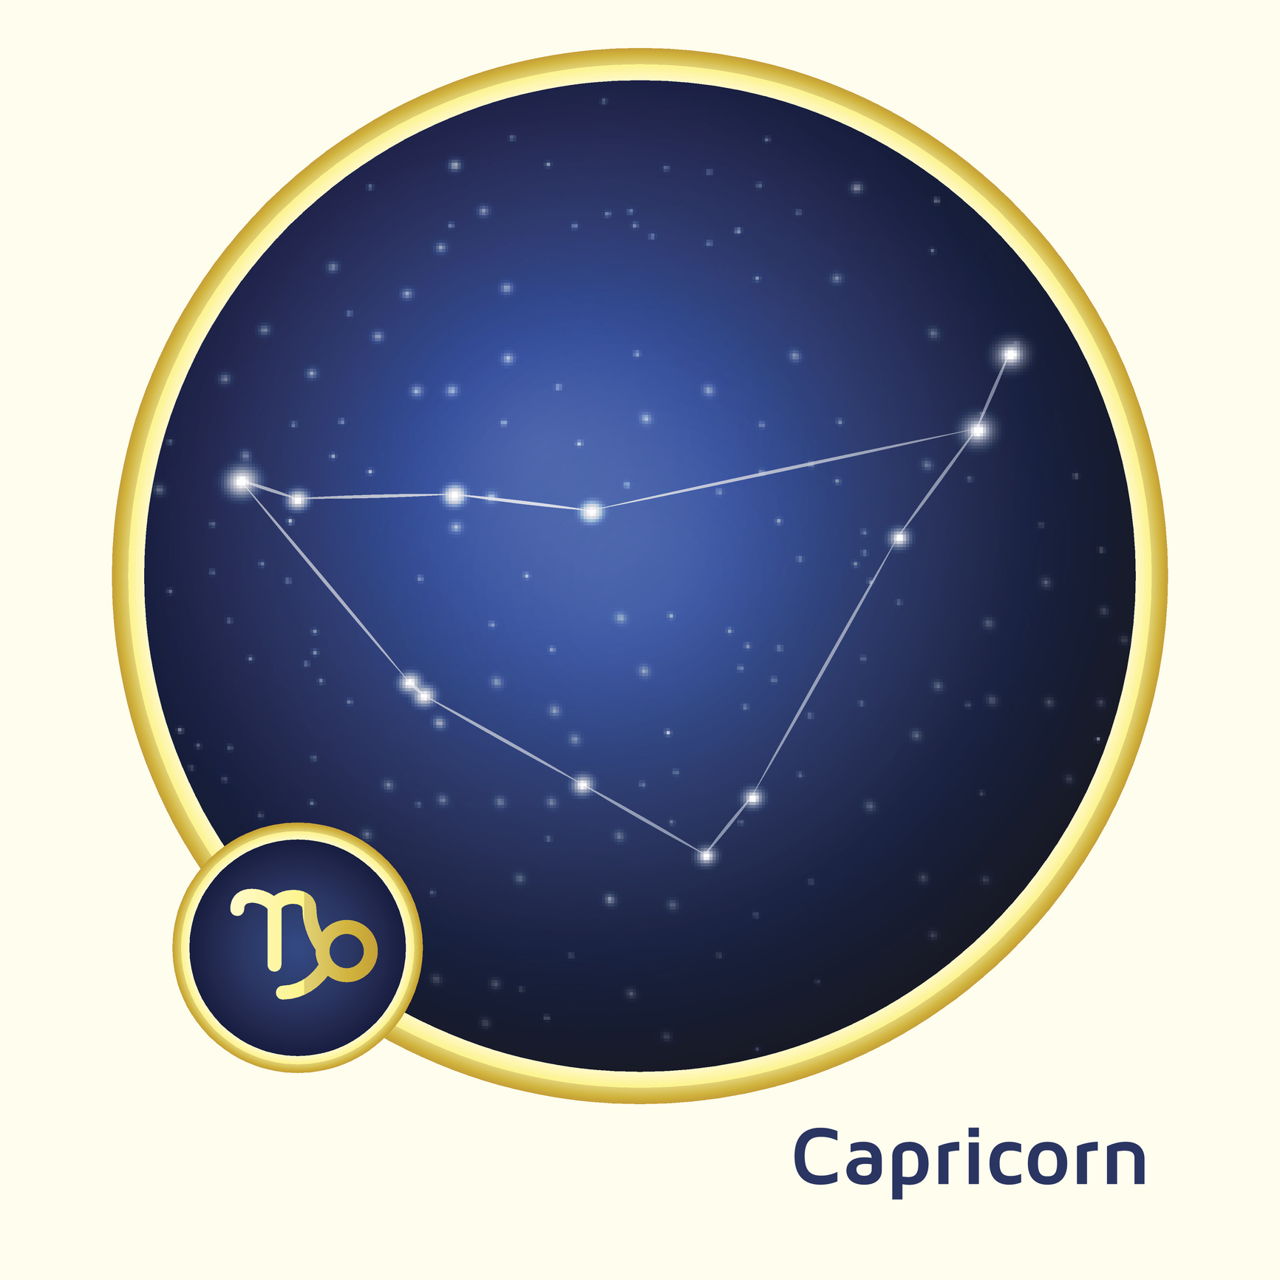 Find Out What the Personality of a Capricorn is Really Like